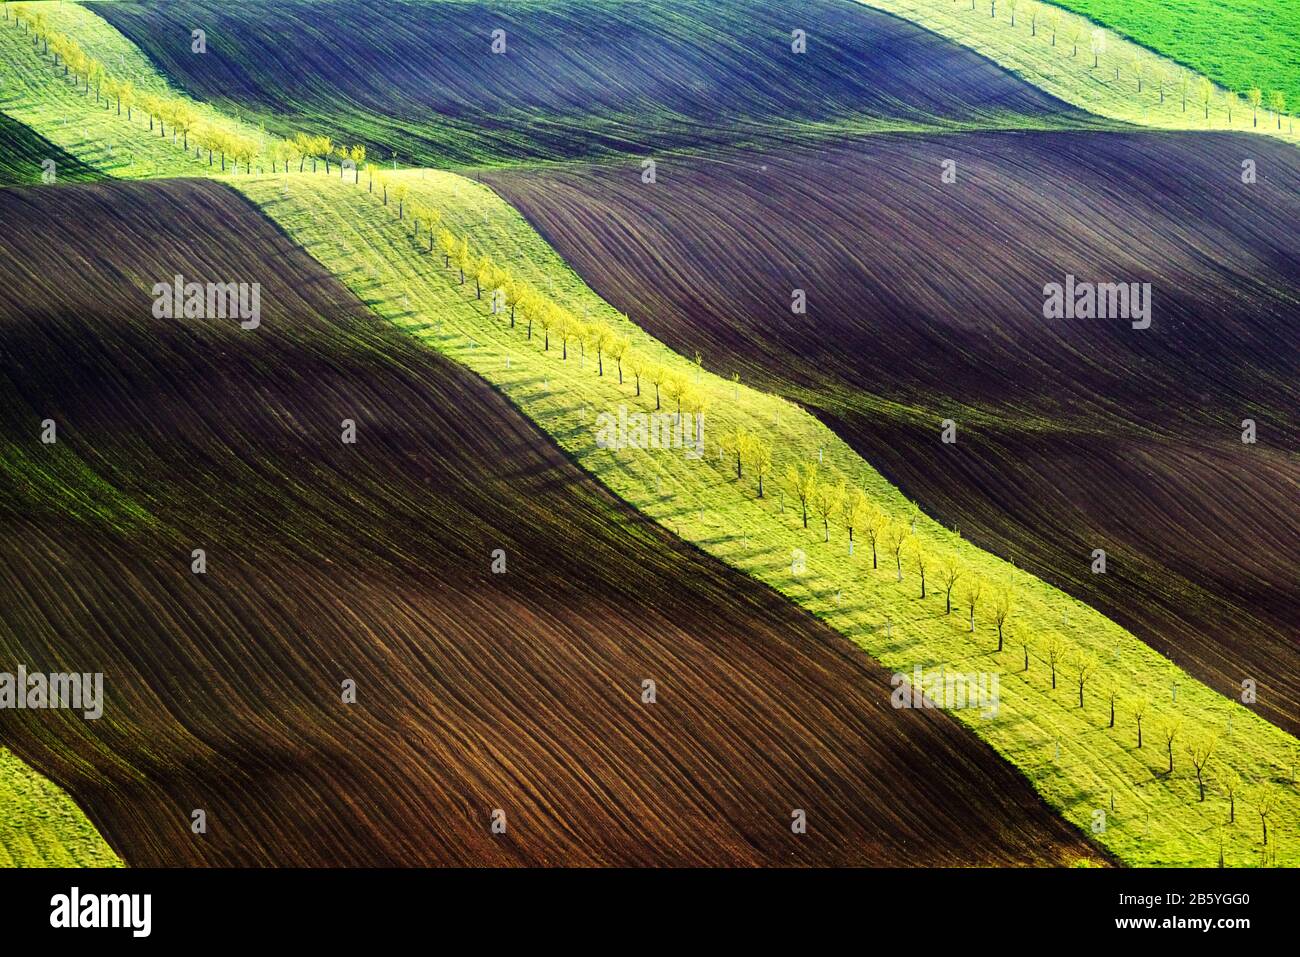 Green and brown waves of the agricultural fields of South Moravia, Czech Republic. Rural spring landscape with colored striped hills. Can be used like nature background or texture Stock Photo